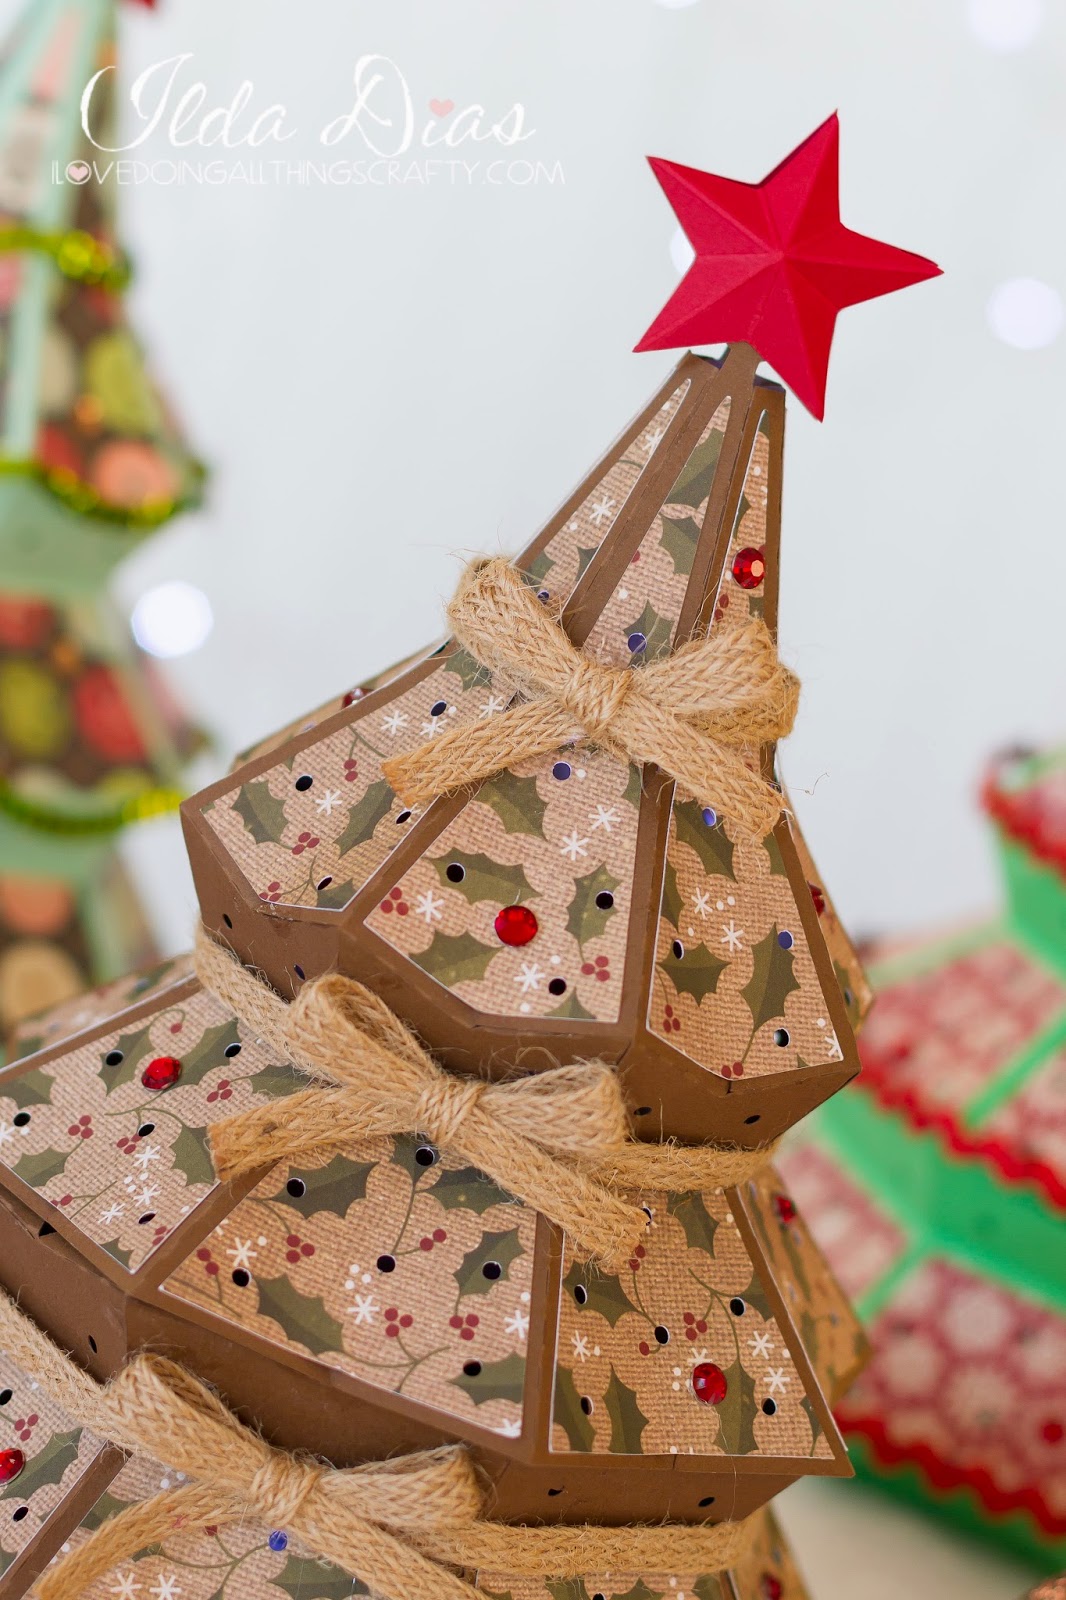 Download I Love Doing All Things Crafty: 3D Christmas Tree Luminary